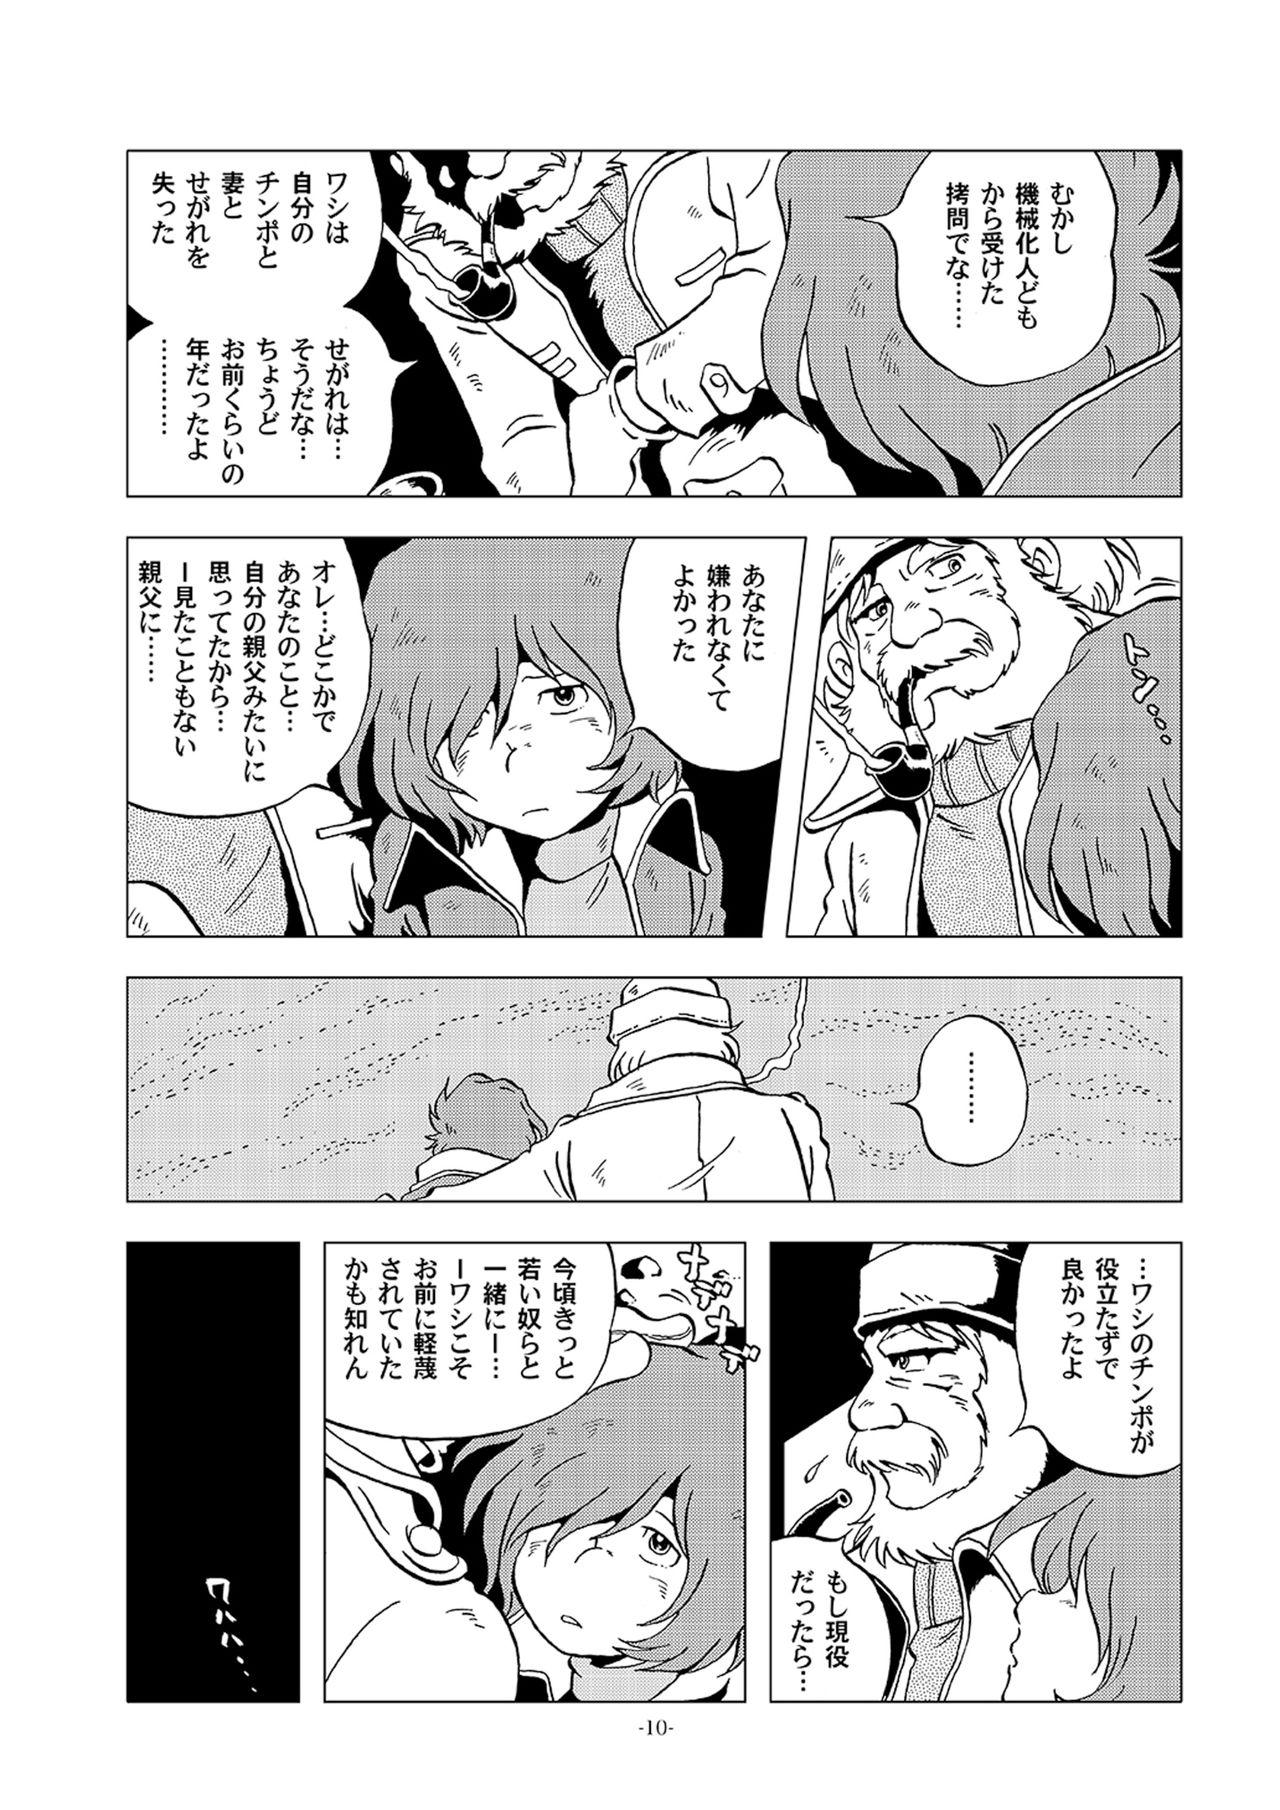 Old And Young Tetsuro Legend Partisan Hen - Galaxy express 999 Woman Fucking - Page 10